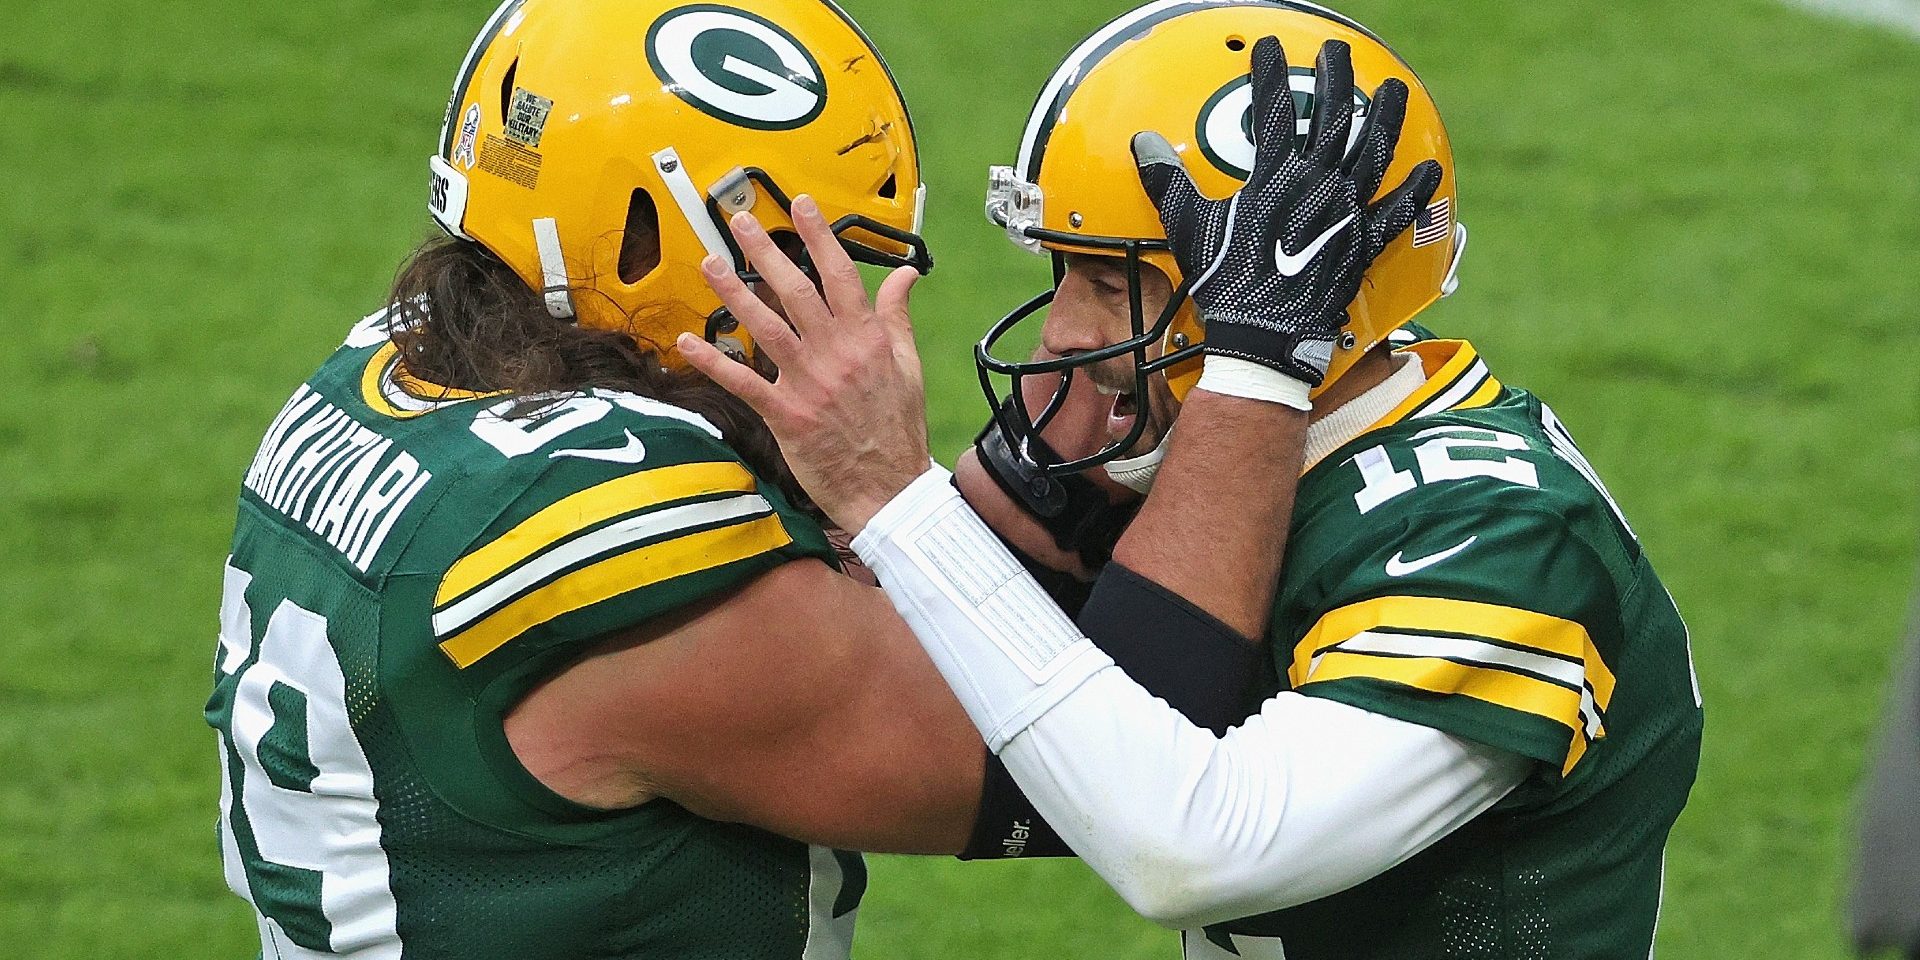 Packers OL David Bakhtiari pokes fun at former teammate and friend Aaron Rodgers over Packers RPO offense: 'Aaron was slow as s—'